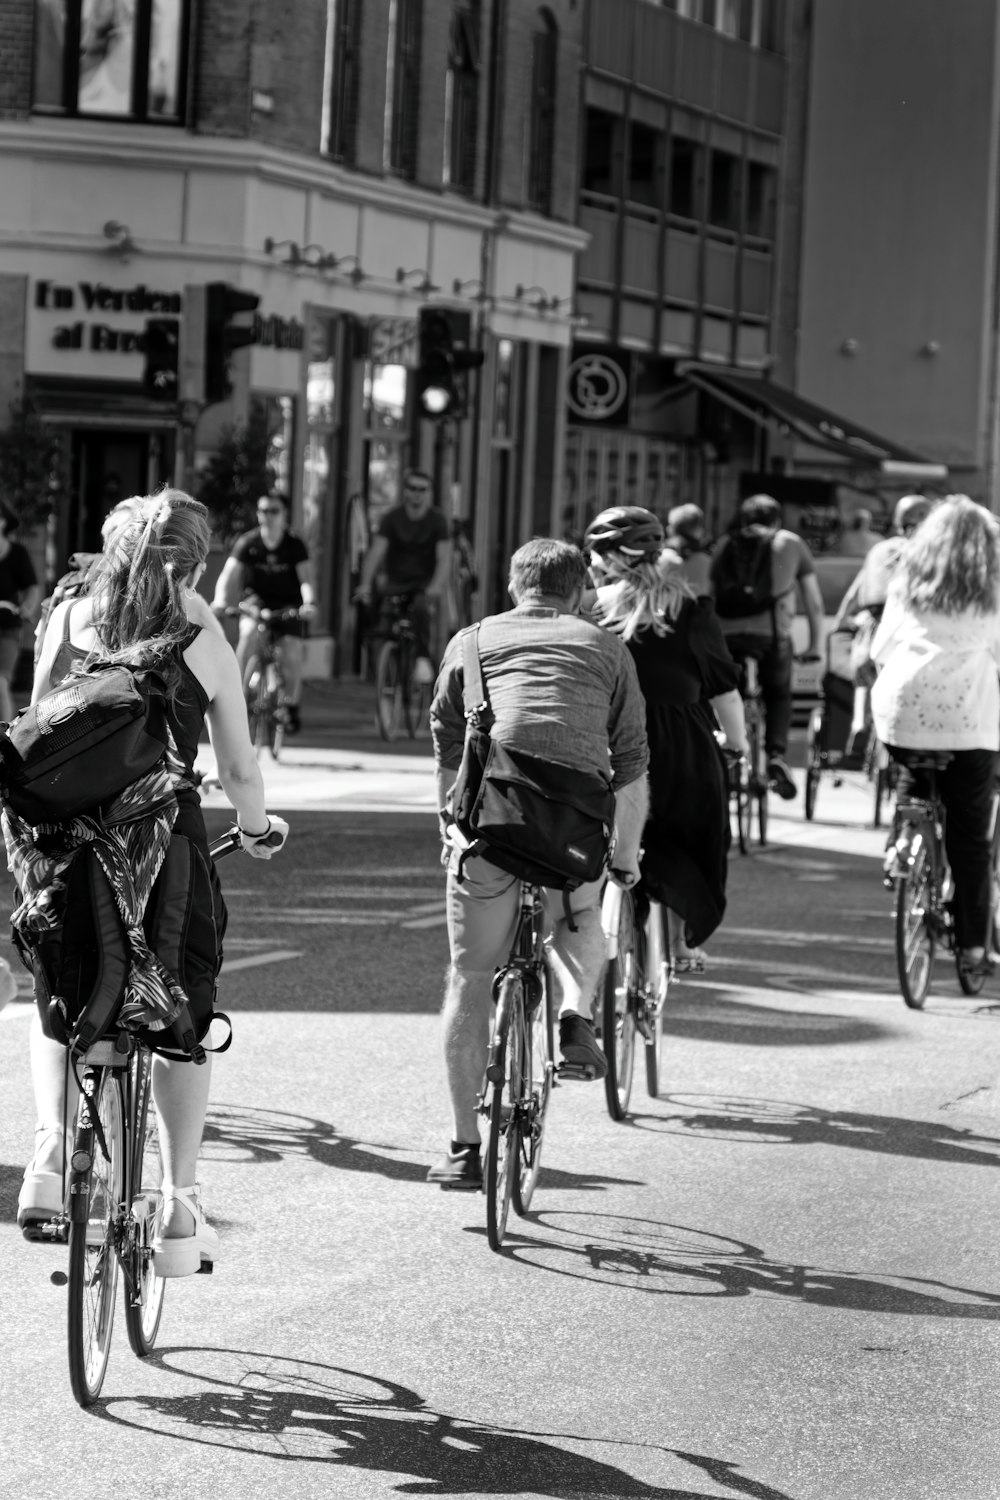 people riding bicycles on a street